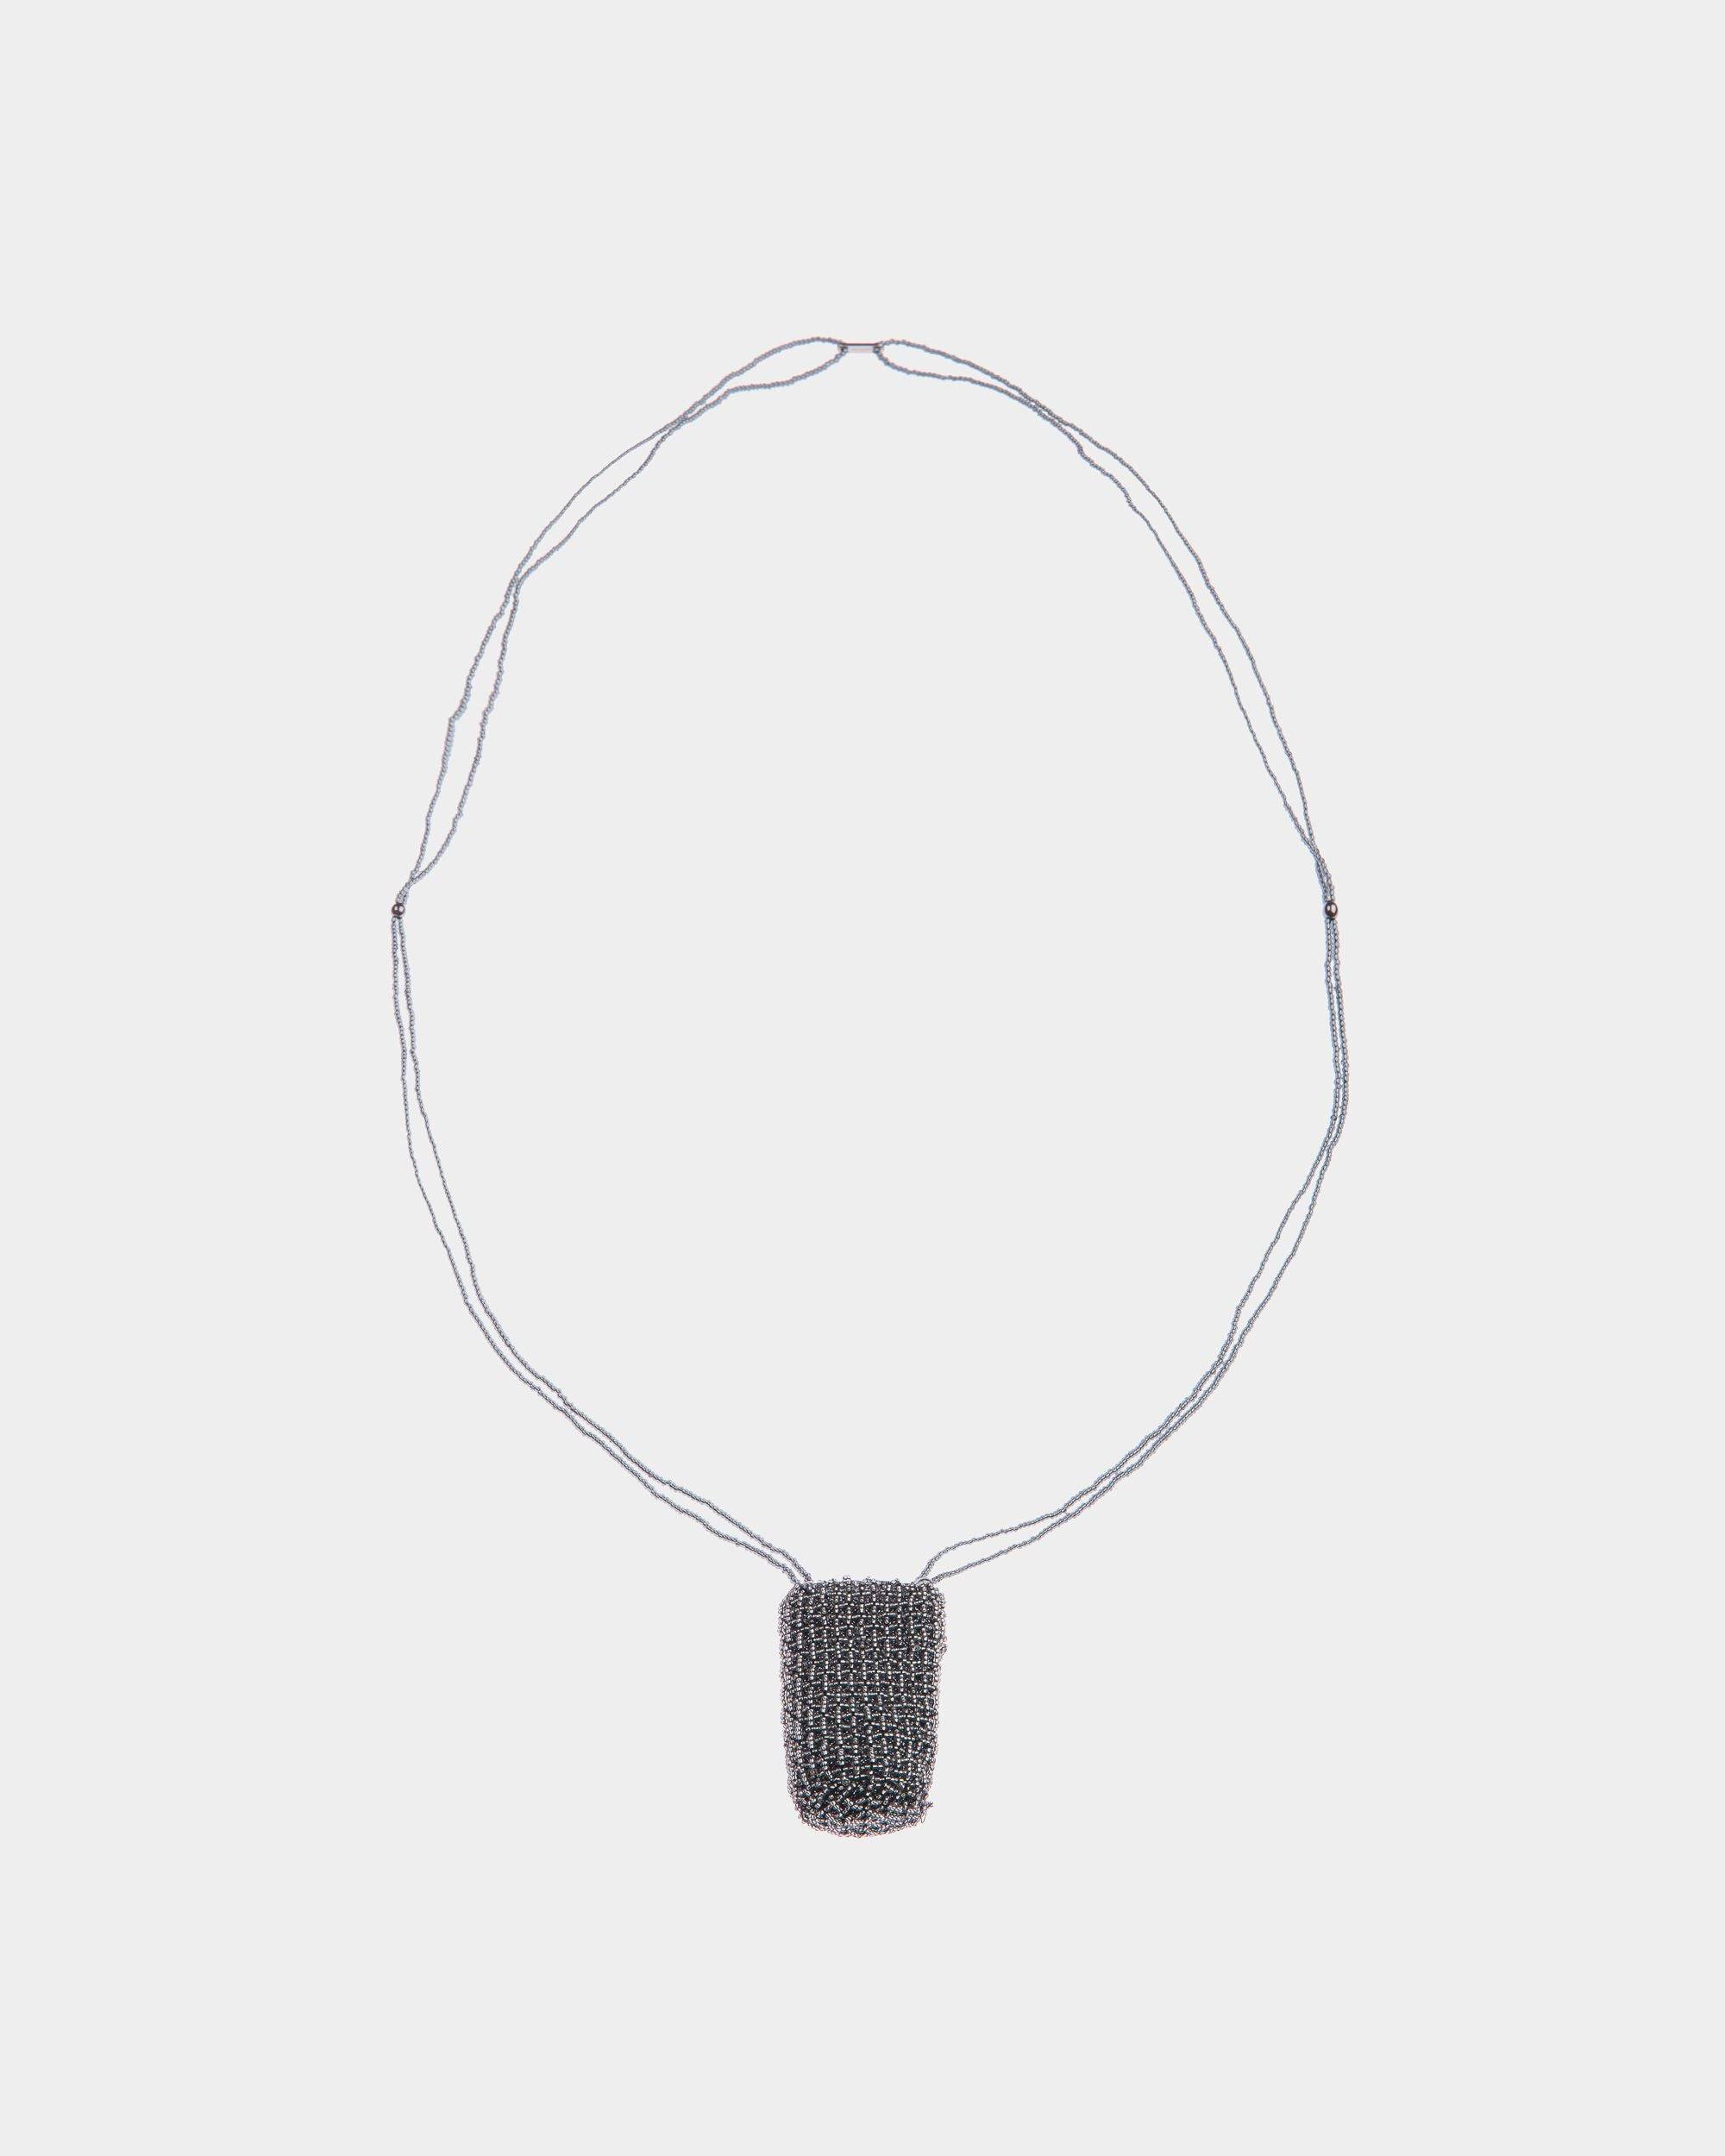 Beads | Women's Necklace in Silver Beads | Bally | Still Life Front